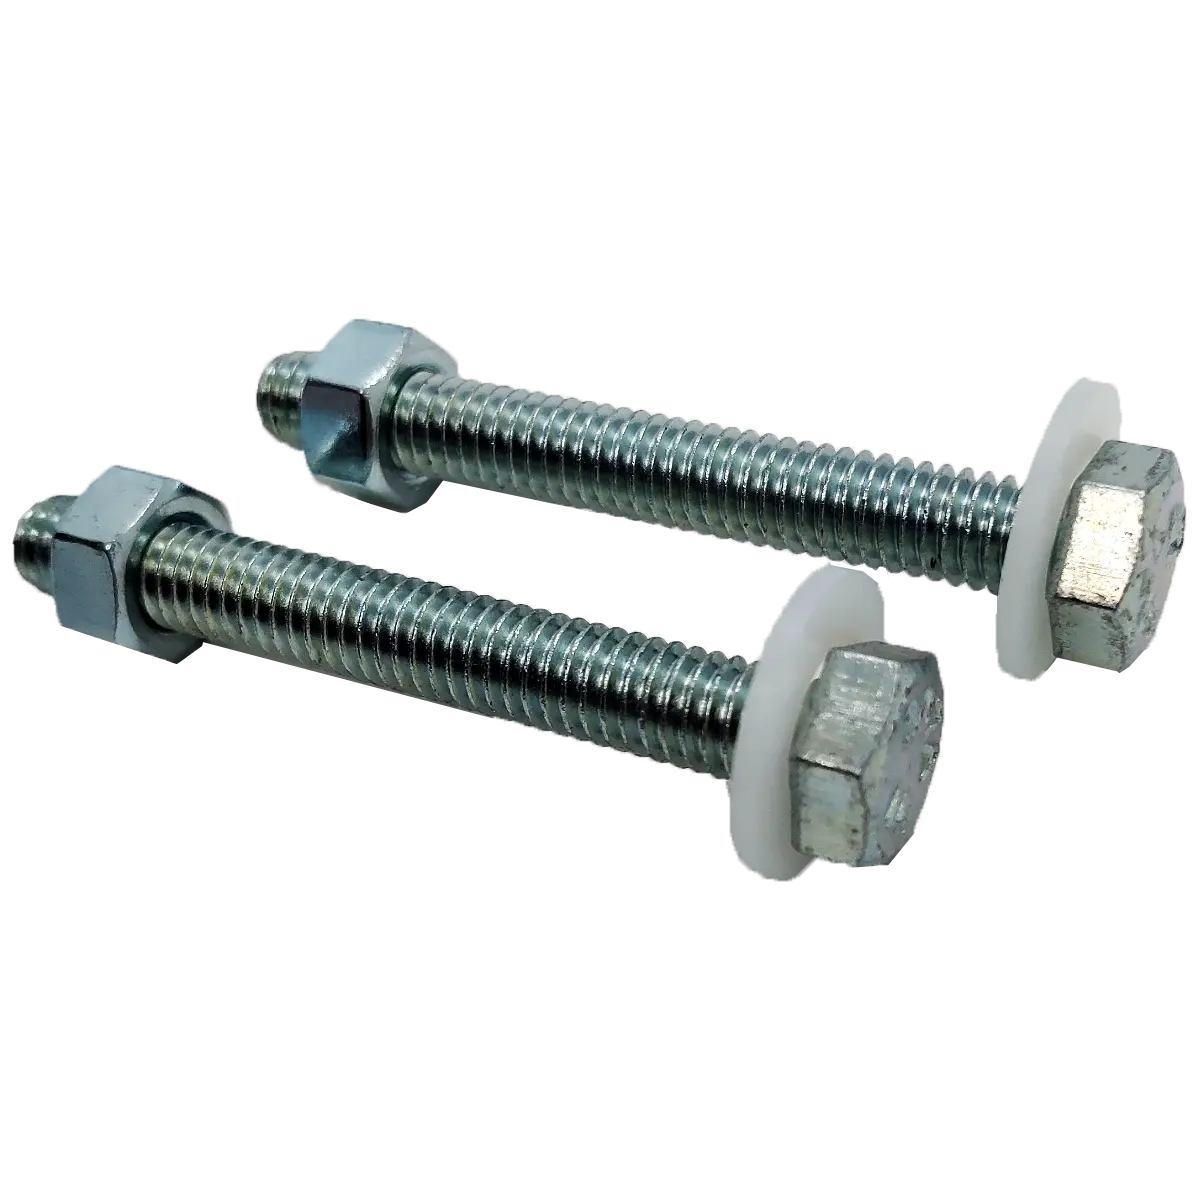 Stainless Steel Nut, Bolt, Washer set